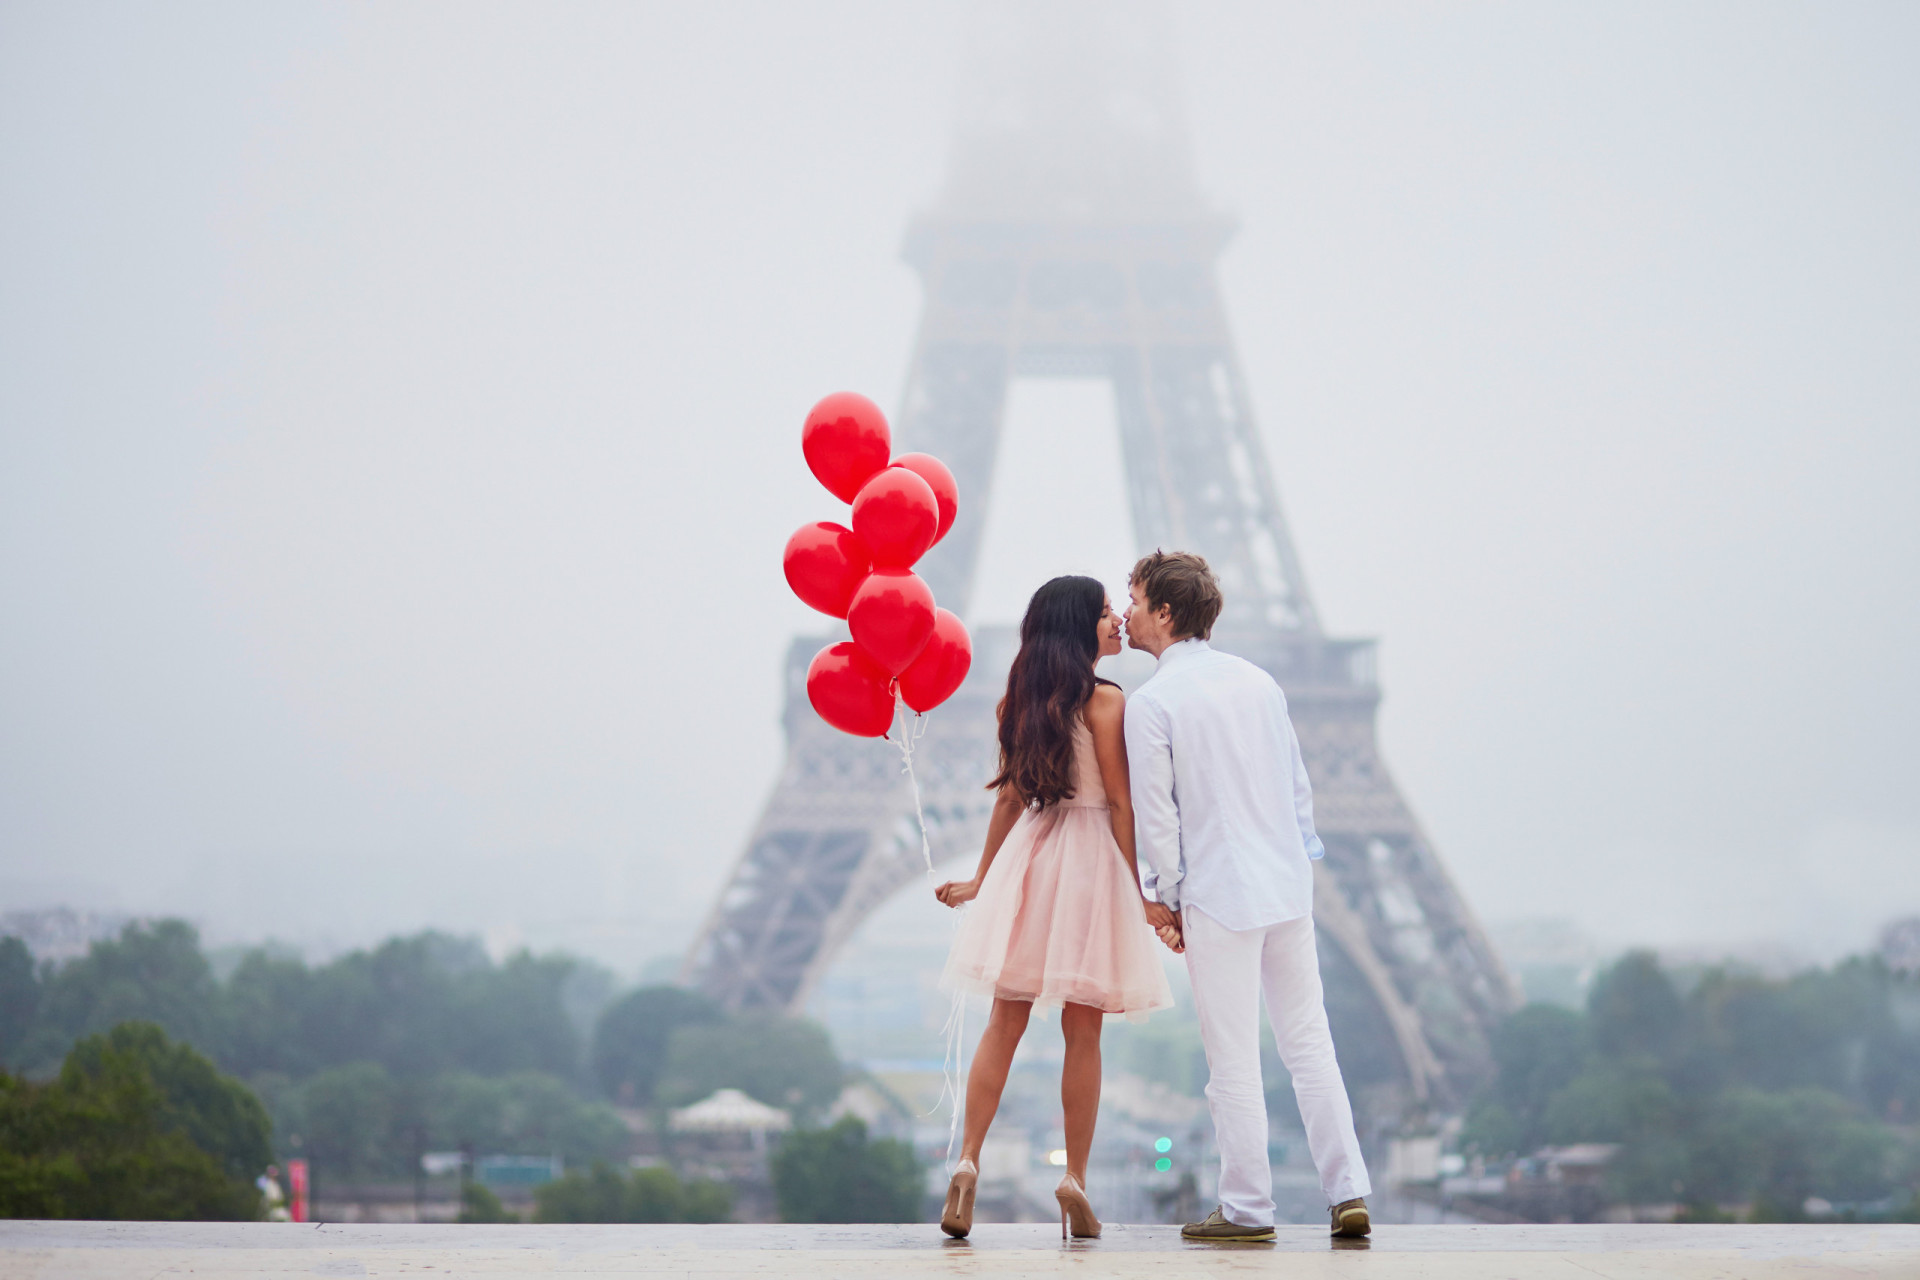 <p>The theory is that the image of an elegant and sophisticated Paris creates extremely high expectations. The sight of dirty sneakers instead of fancy heels sends these visitors over the edge.</p><p><a href="https://www.msn.com/en-us/community/channel/vid-7xx8mnucu55yw63we9va2gwr7uihbxwc68fxqp25x6tg4ftibpra?cvid=94631541bc0f4f89bfd59158d696ad7e">Follow us and access great exclusive content every day</a></p>